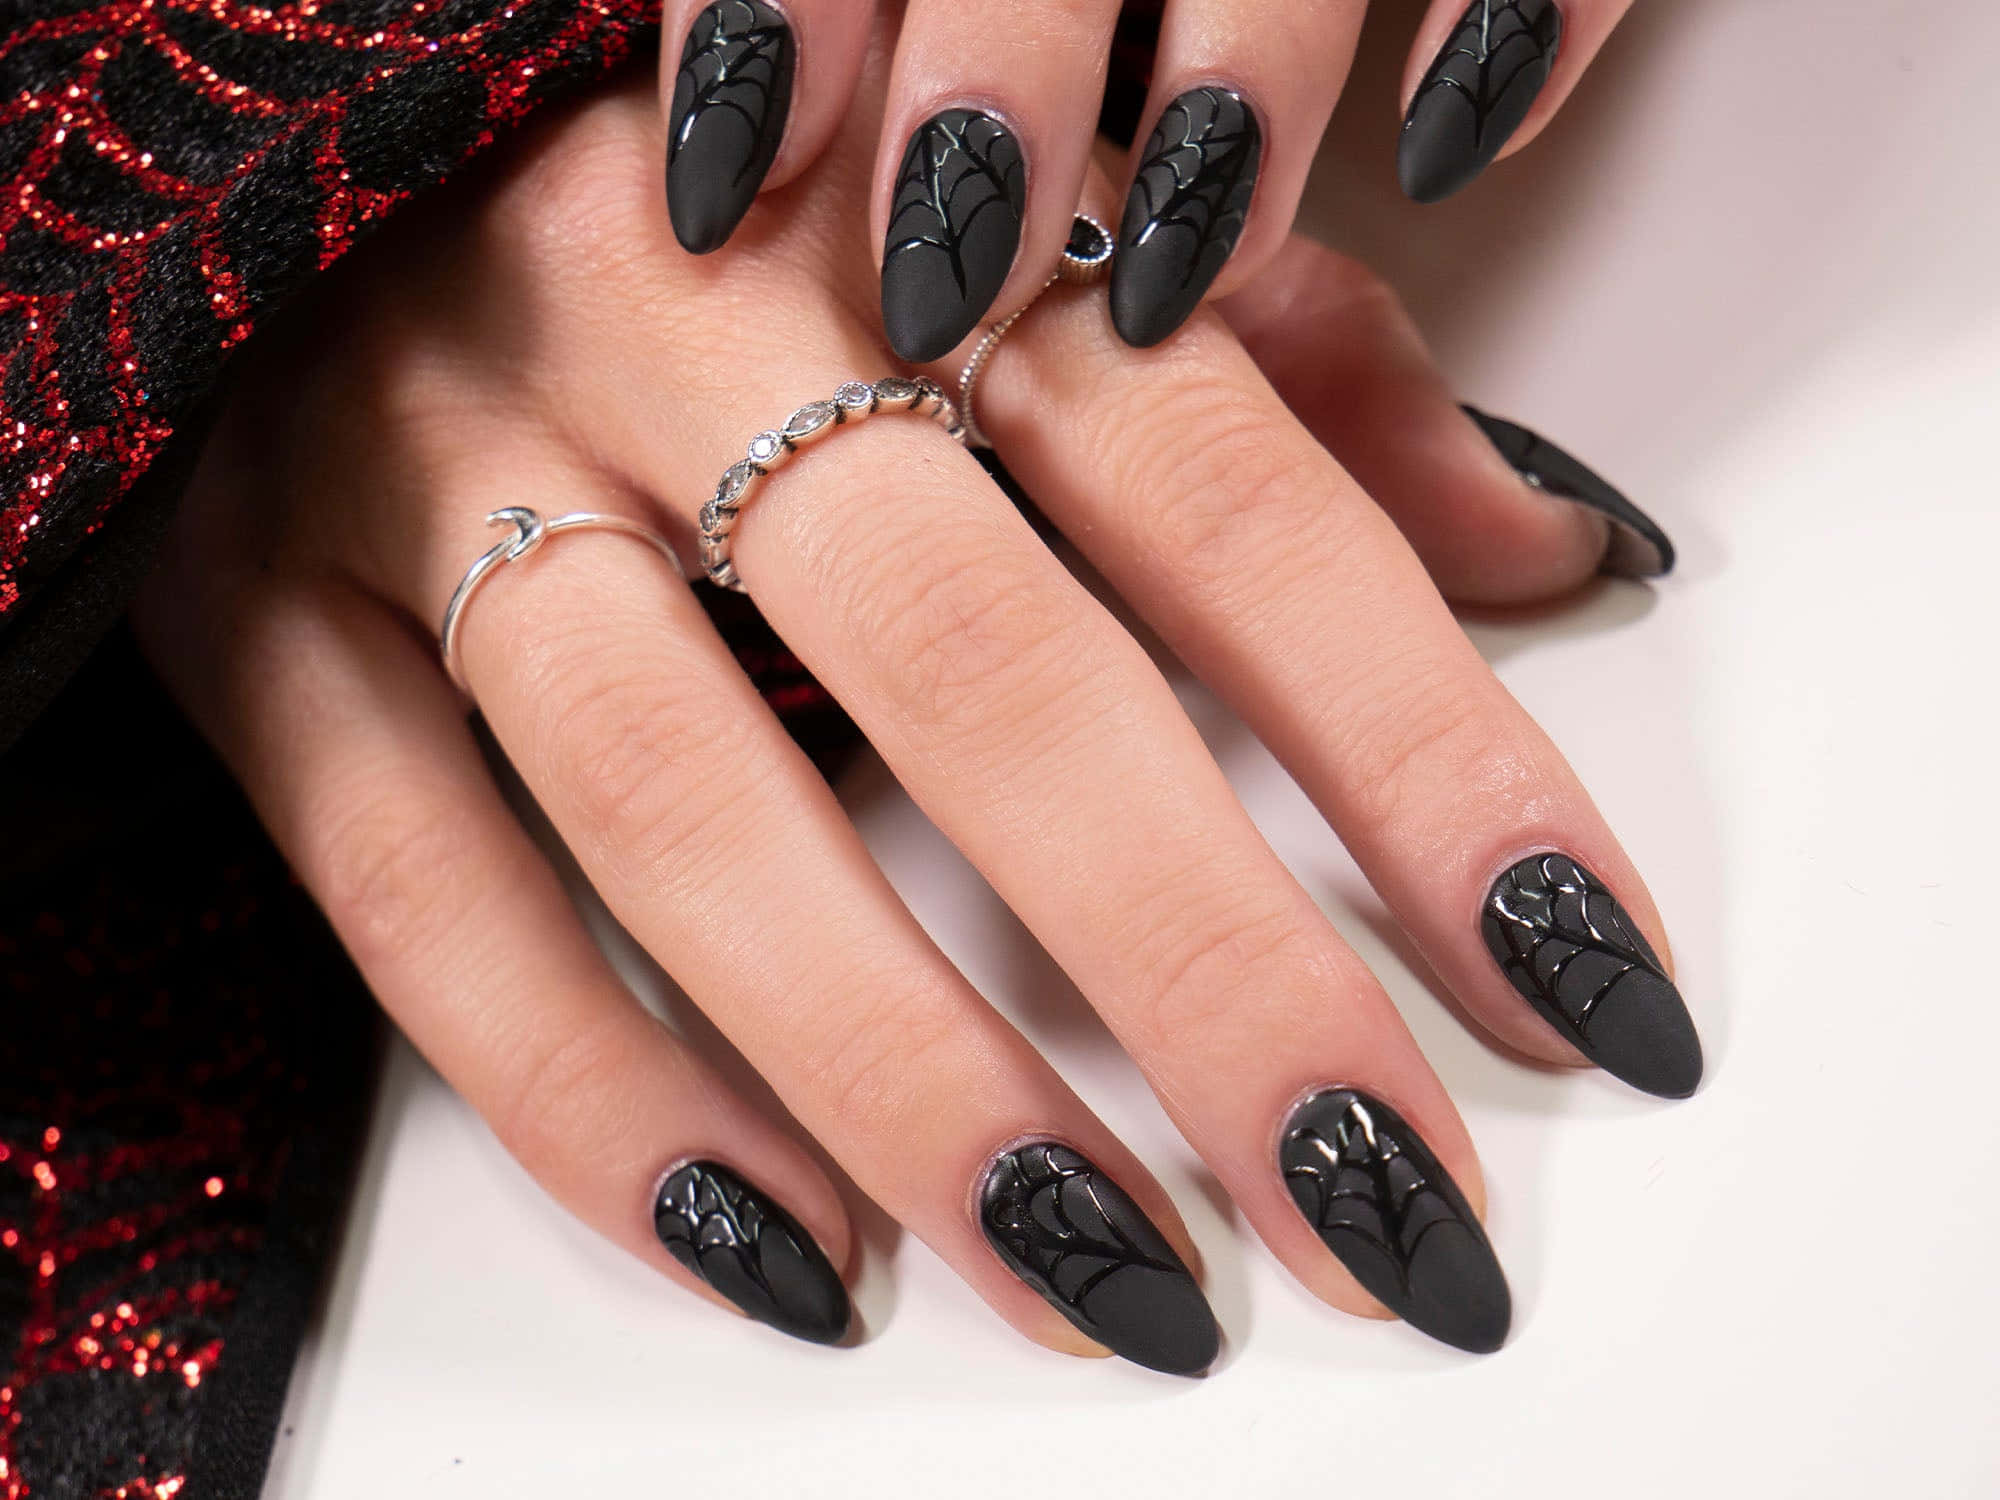 Get Creative and Spooky this Halloween with these Wild Nail Art Designs Wallpaper